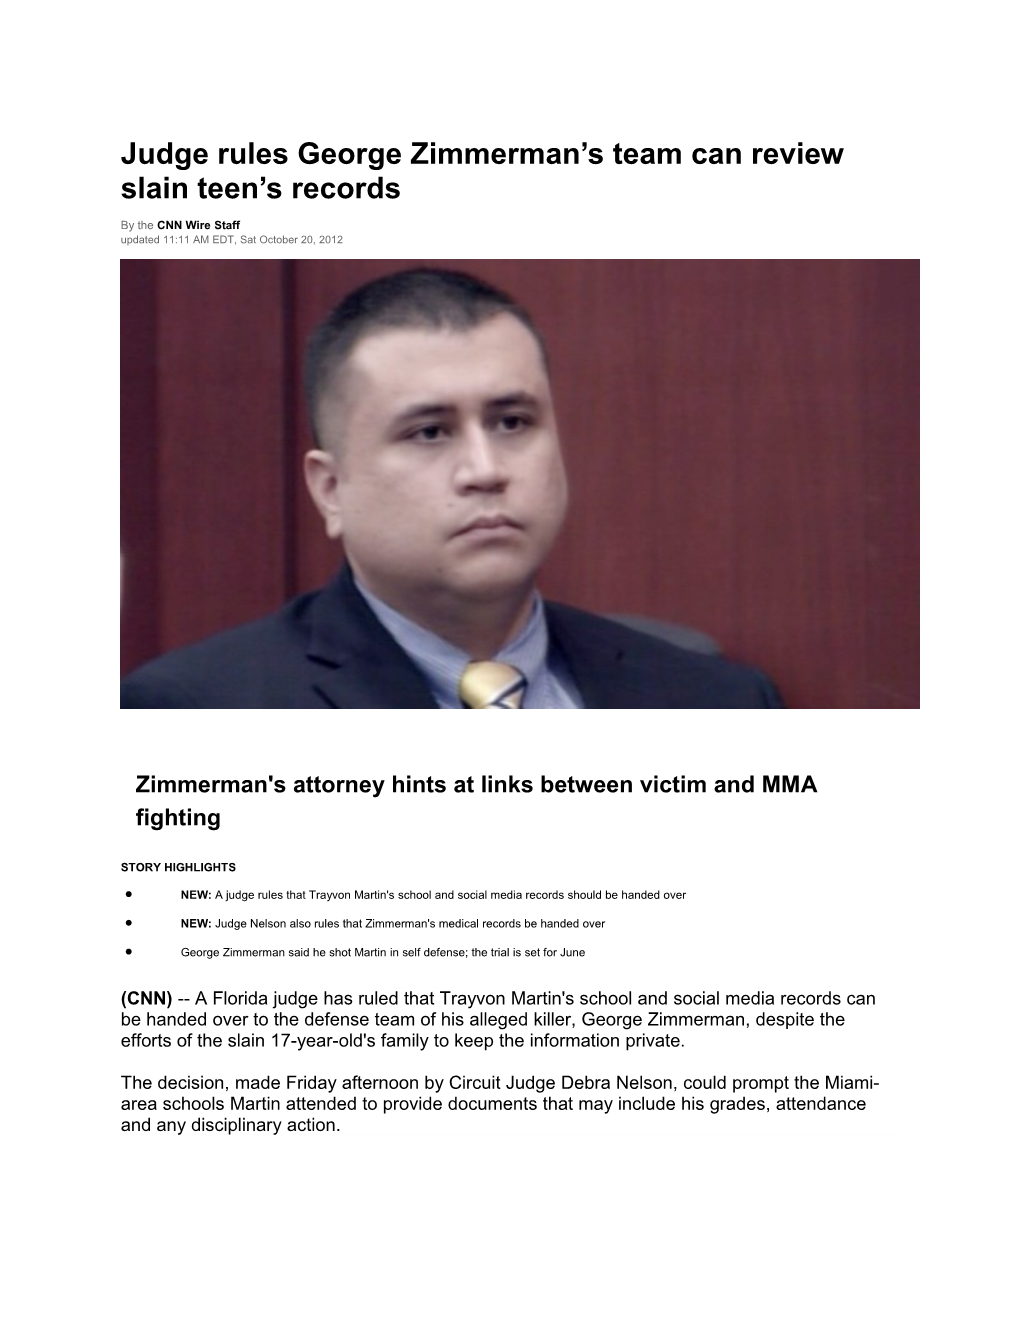 Judge Rules George Zimmerman S Team Can Review Slain Teen S Records